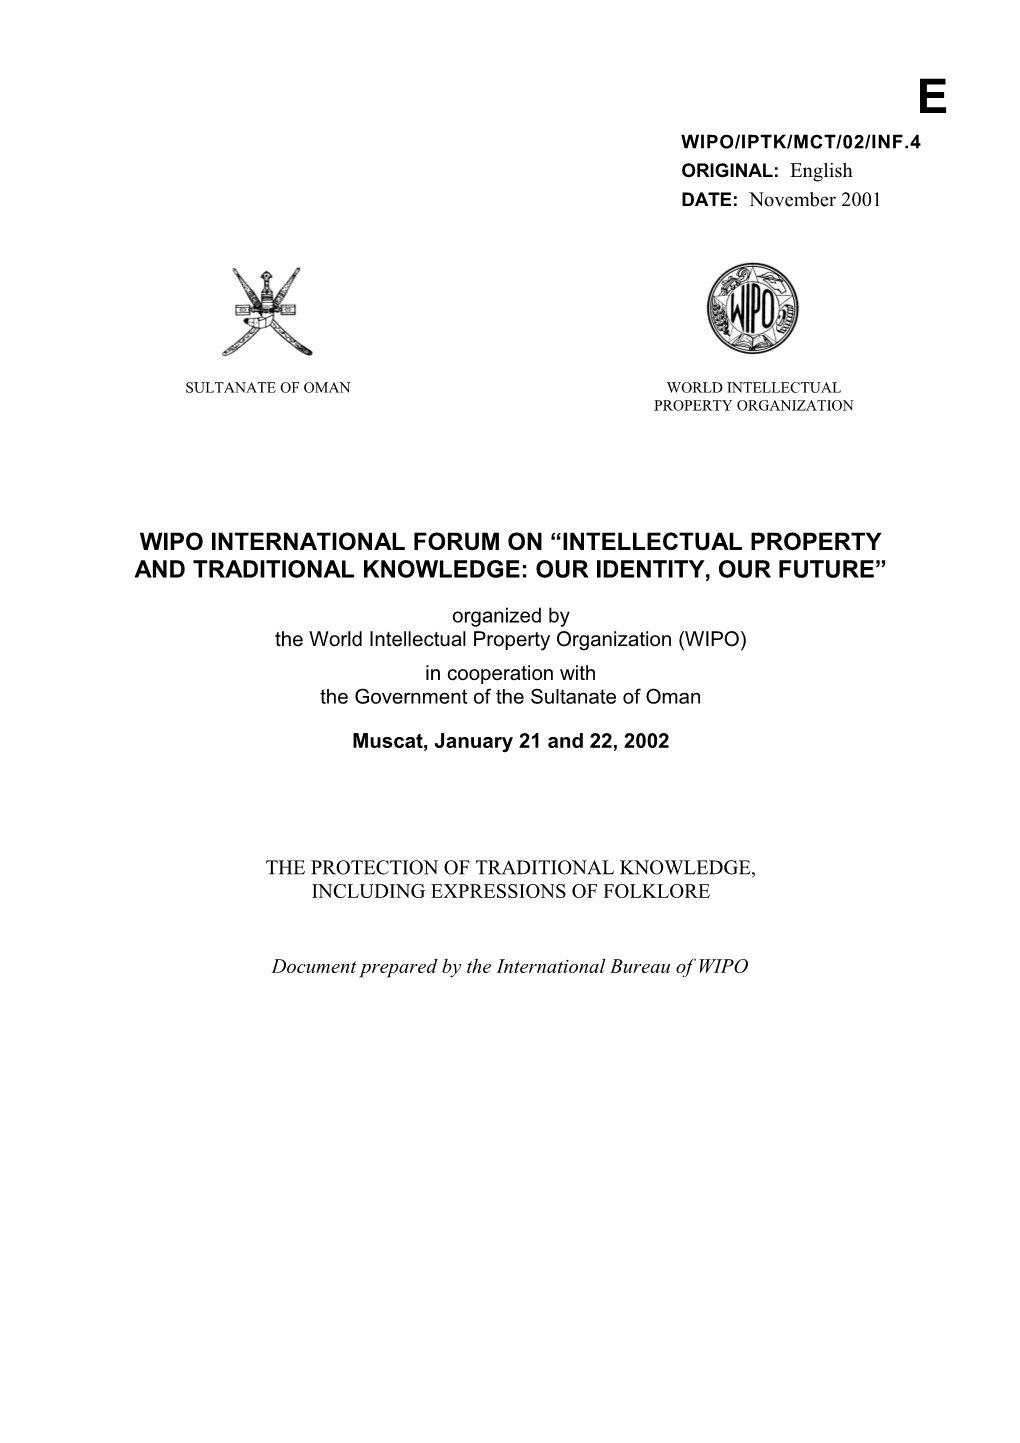 WIPO/IPTK/MCT/02/INF/4: the Protection of Traditional Knowledge, Including Expressions